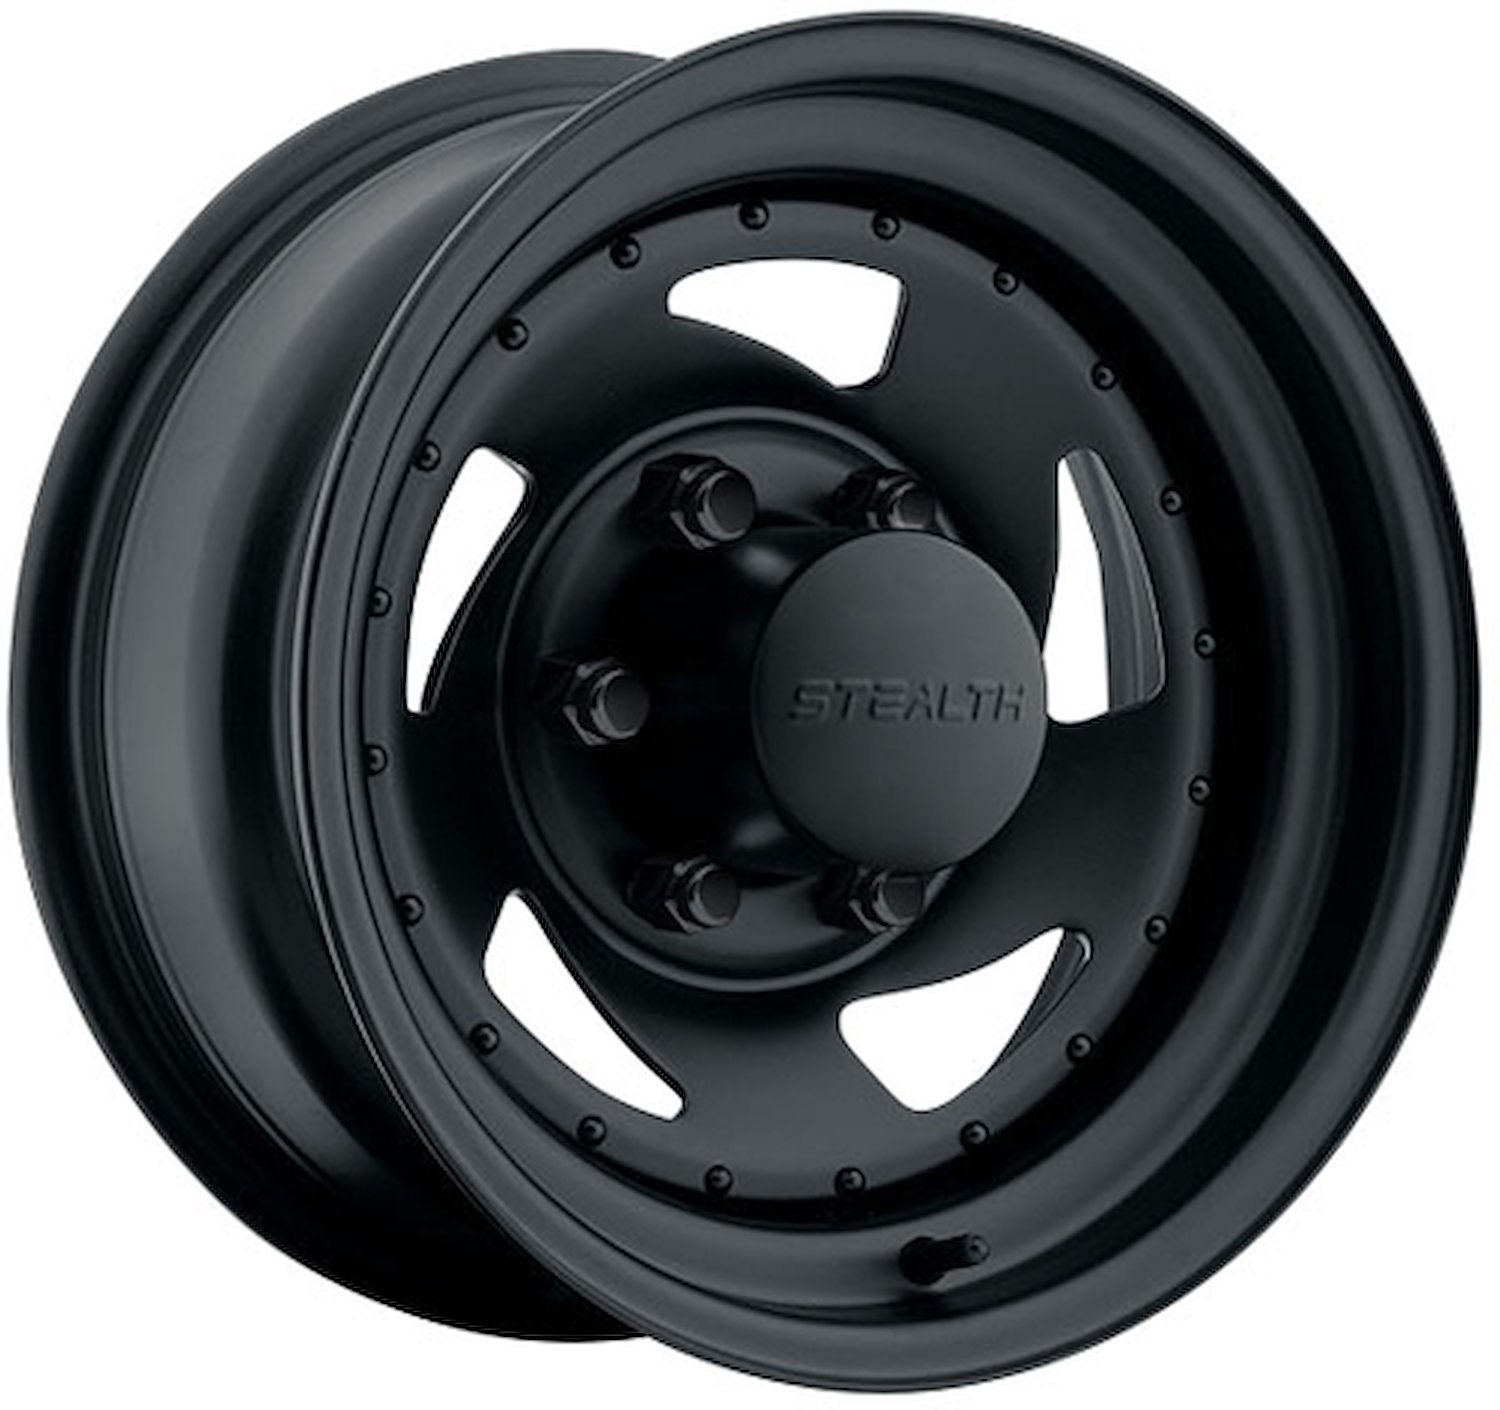 STEALTH BLACK BLADE 15 x 10 6 x 55 Bolt Circle 375 Back Spacing 44 offset 428 Center Bore 1500 lbs Load Rating